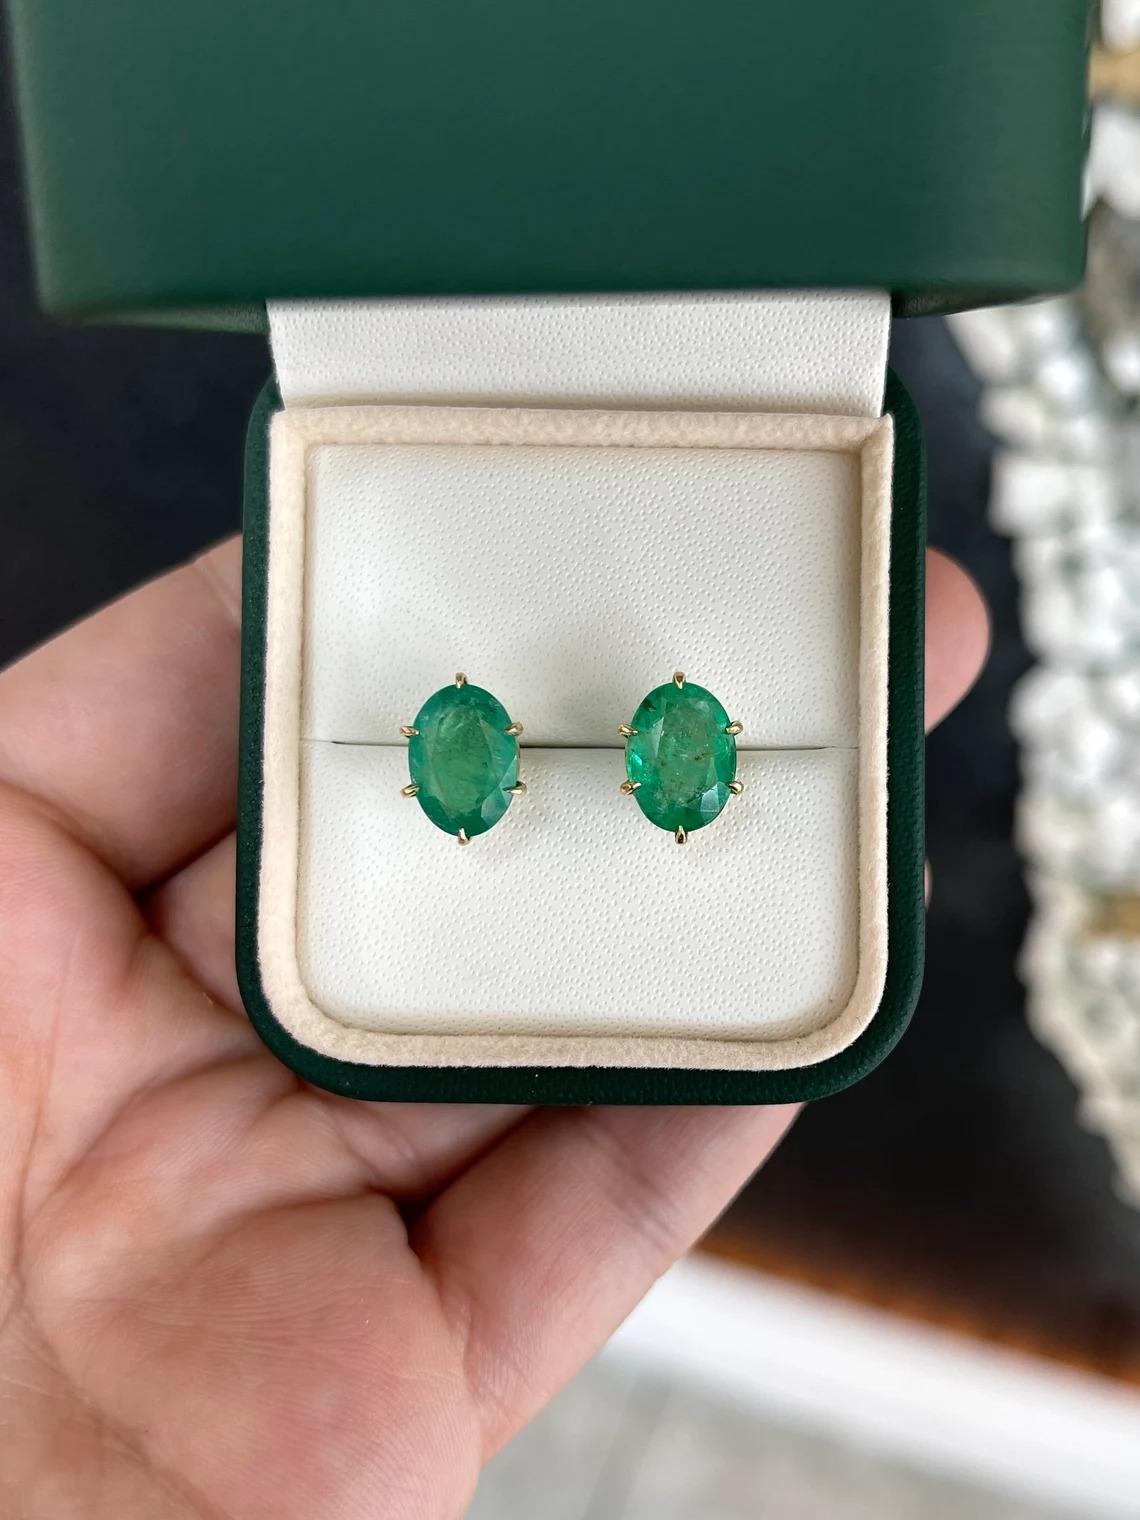 Featured here is a six-prong, solitaire, oval-cut emerald studs in fine 18K yellow gold. Displayed are gorgeous, medium green emeralds with incredible size and high quality that make these so ideal for an emerald lover. The gems are accented by